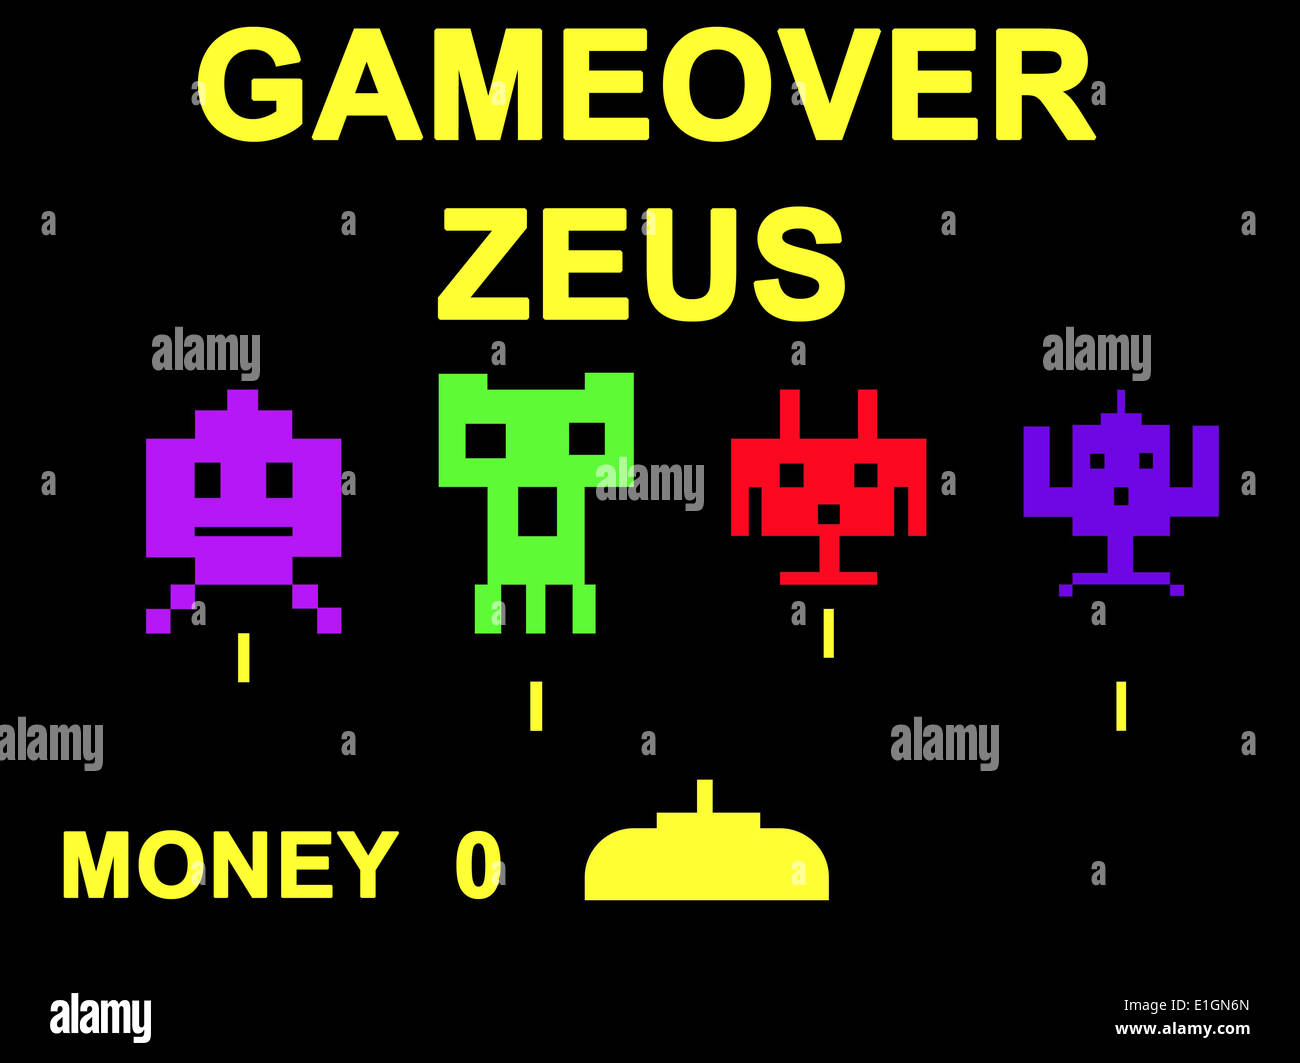 Gameover Zeus virus concept using space invaders game. Stock Photo